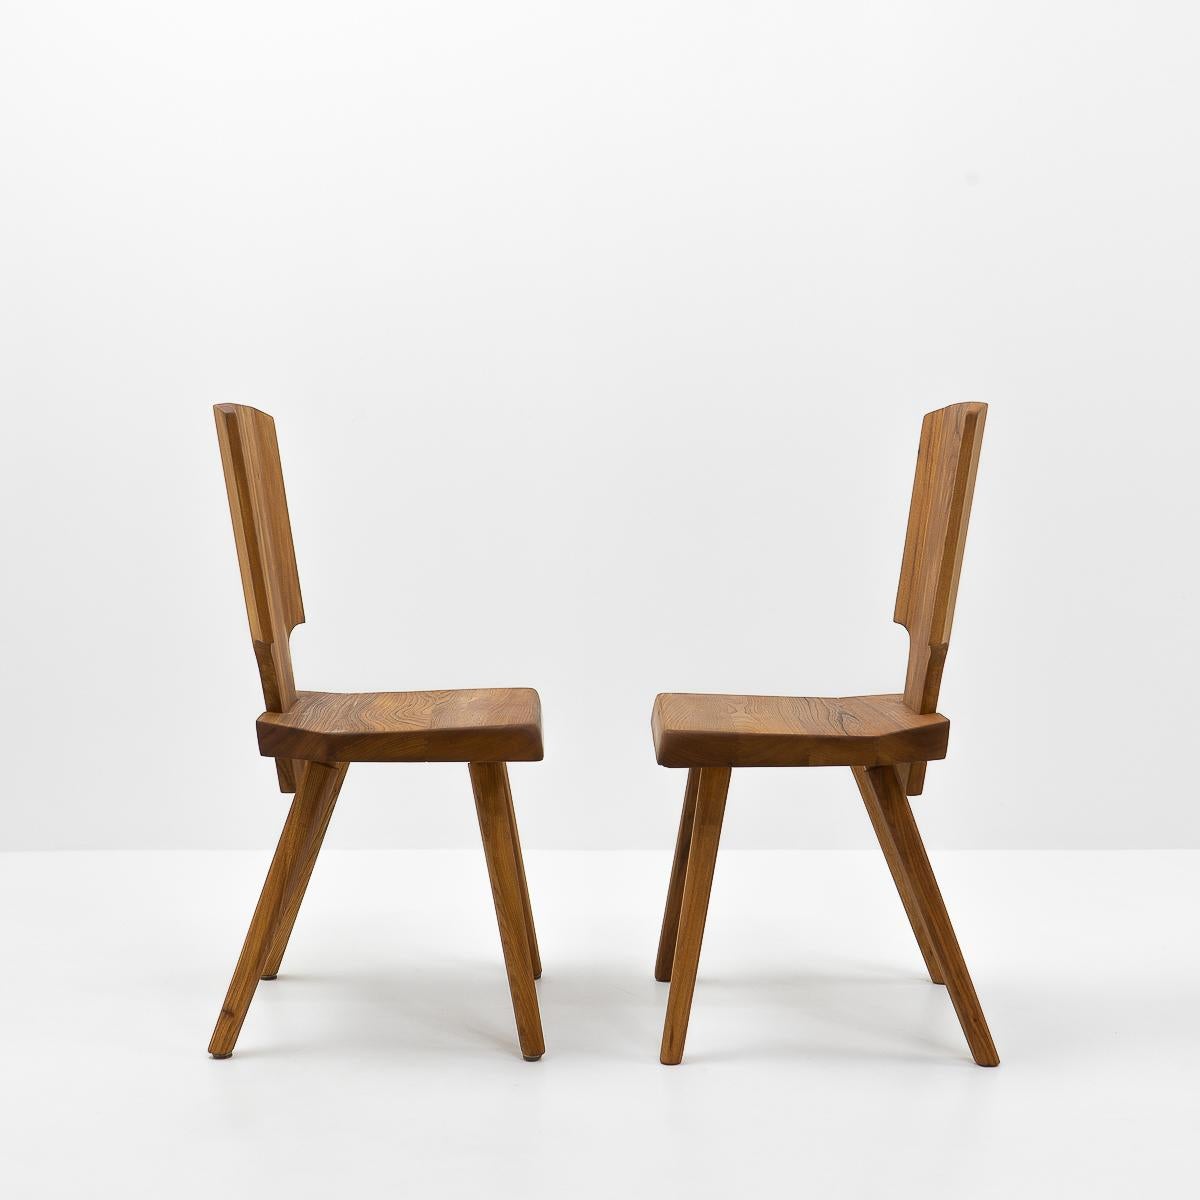 French Design, Pierre Chapo, French Elm S28 Chairs, 1980s For Sale 1